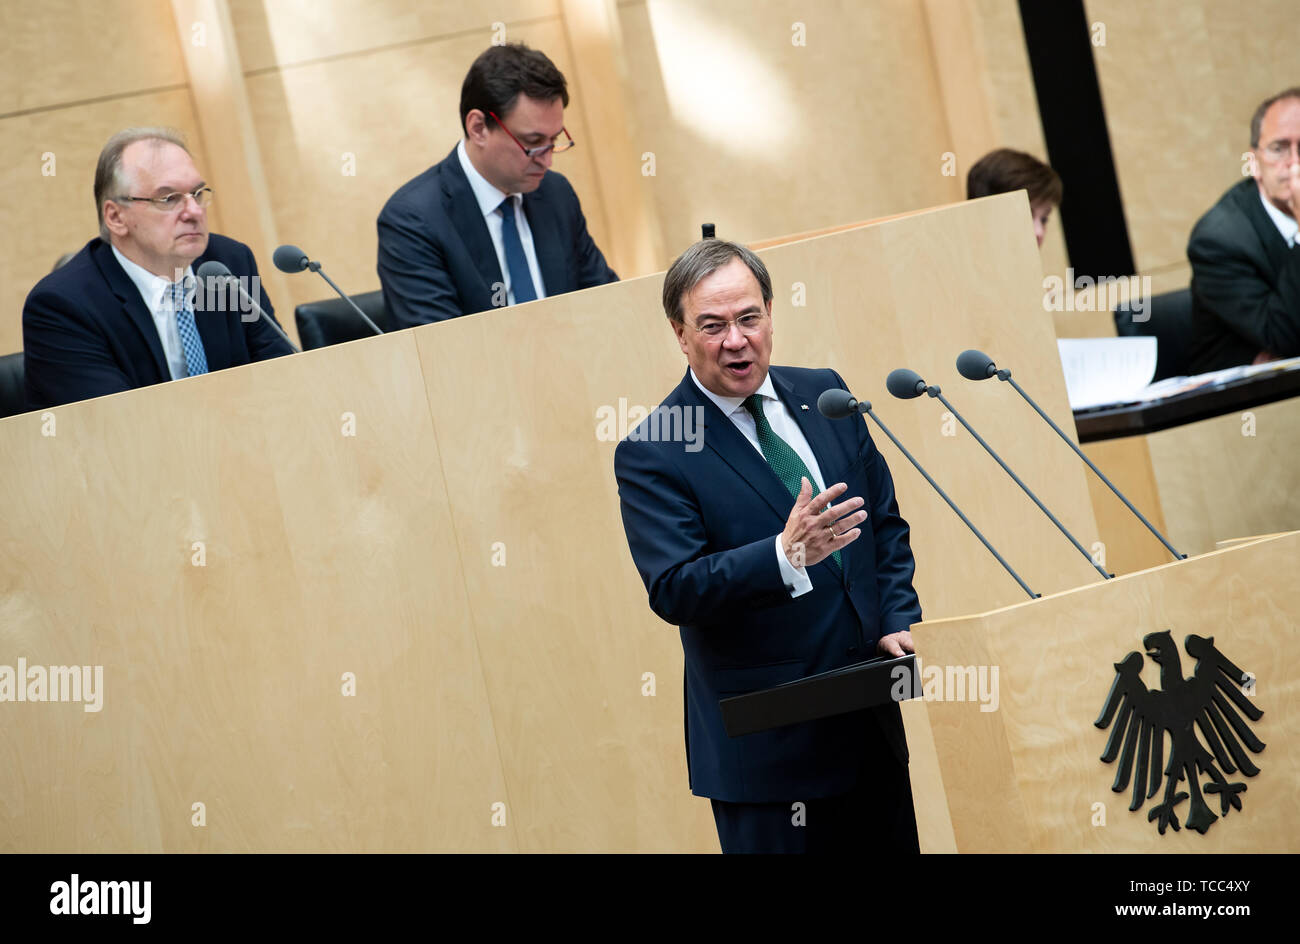 Berlin, Germany. 07th June, 2019. Armin Laschet (CDU), Prime Minister of North Rhine-Westphalia, speaks at the 978th session of the Bundesrat. Among other things, the Federal Council discusses a reform of the Bafög, the right to vote for people with full care, initiatives to speed up criminal proceedings, and the annual pension adjustment. Credit: Bernd von Jutrczenka/dpa/Alamy Live News Stock Photo